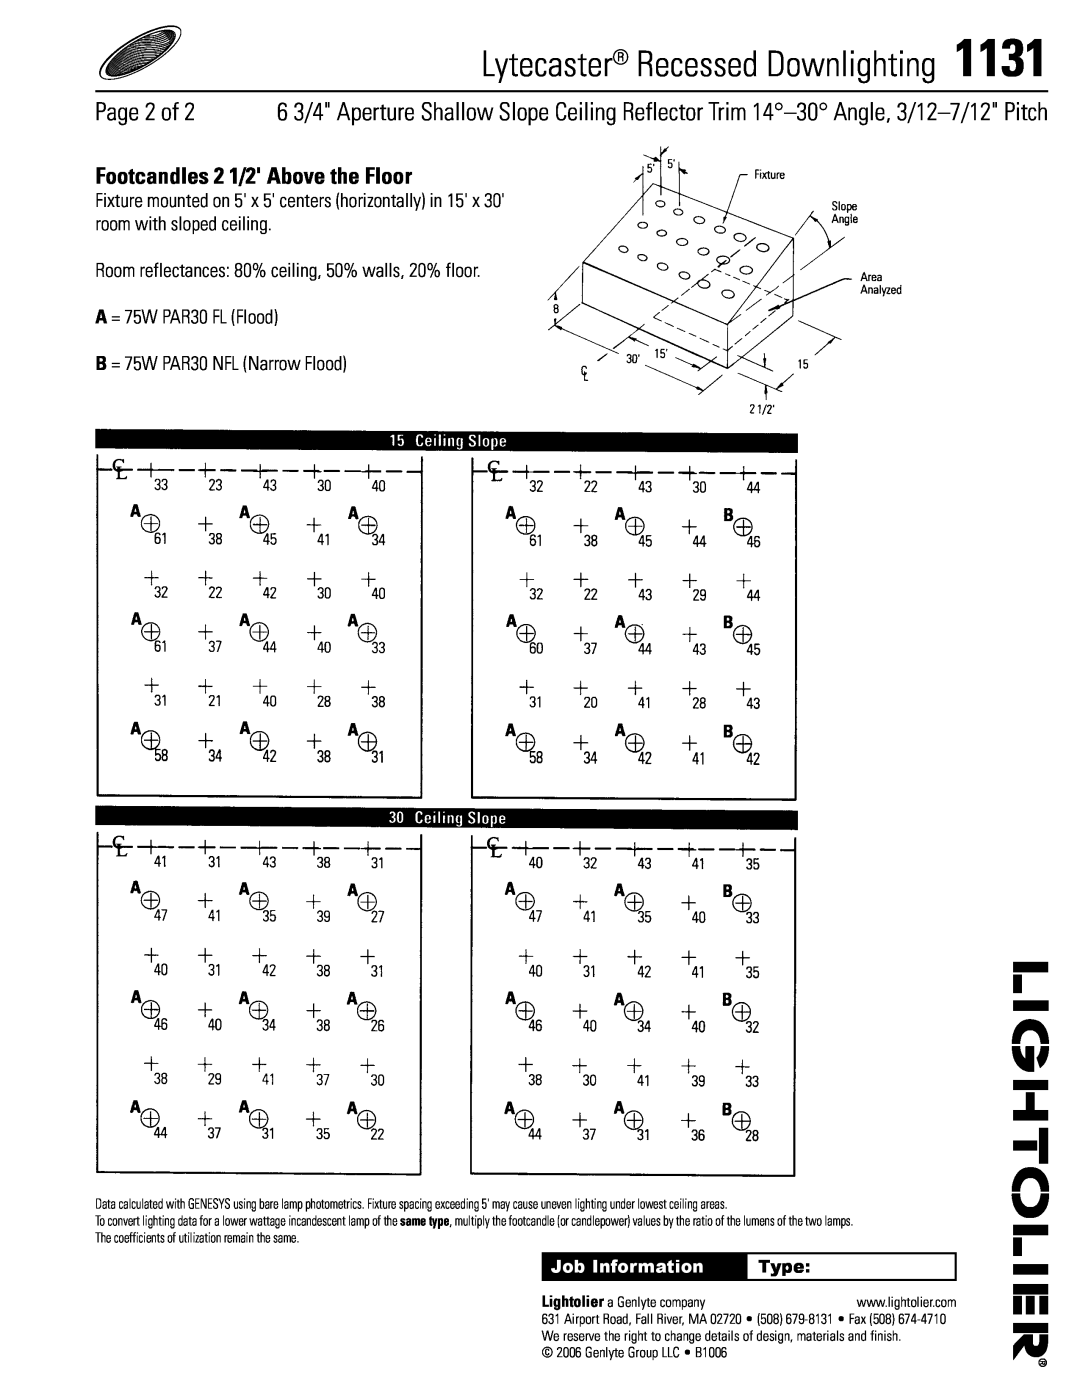 Lightolier 1131 specifications Page of, Lytecaster Recessed Downlighting, Footcandles 2 1/2 Above the Floor 